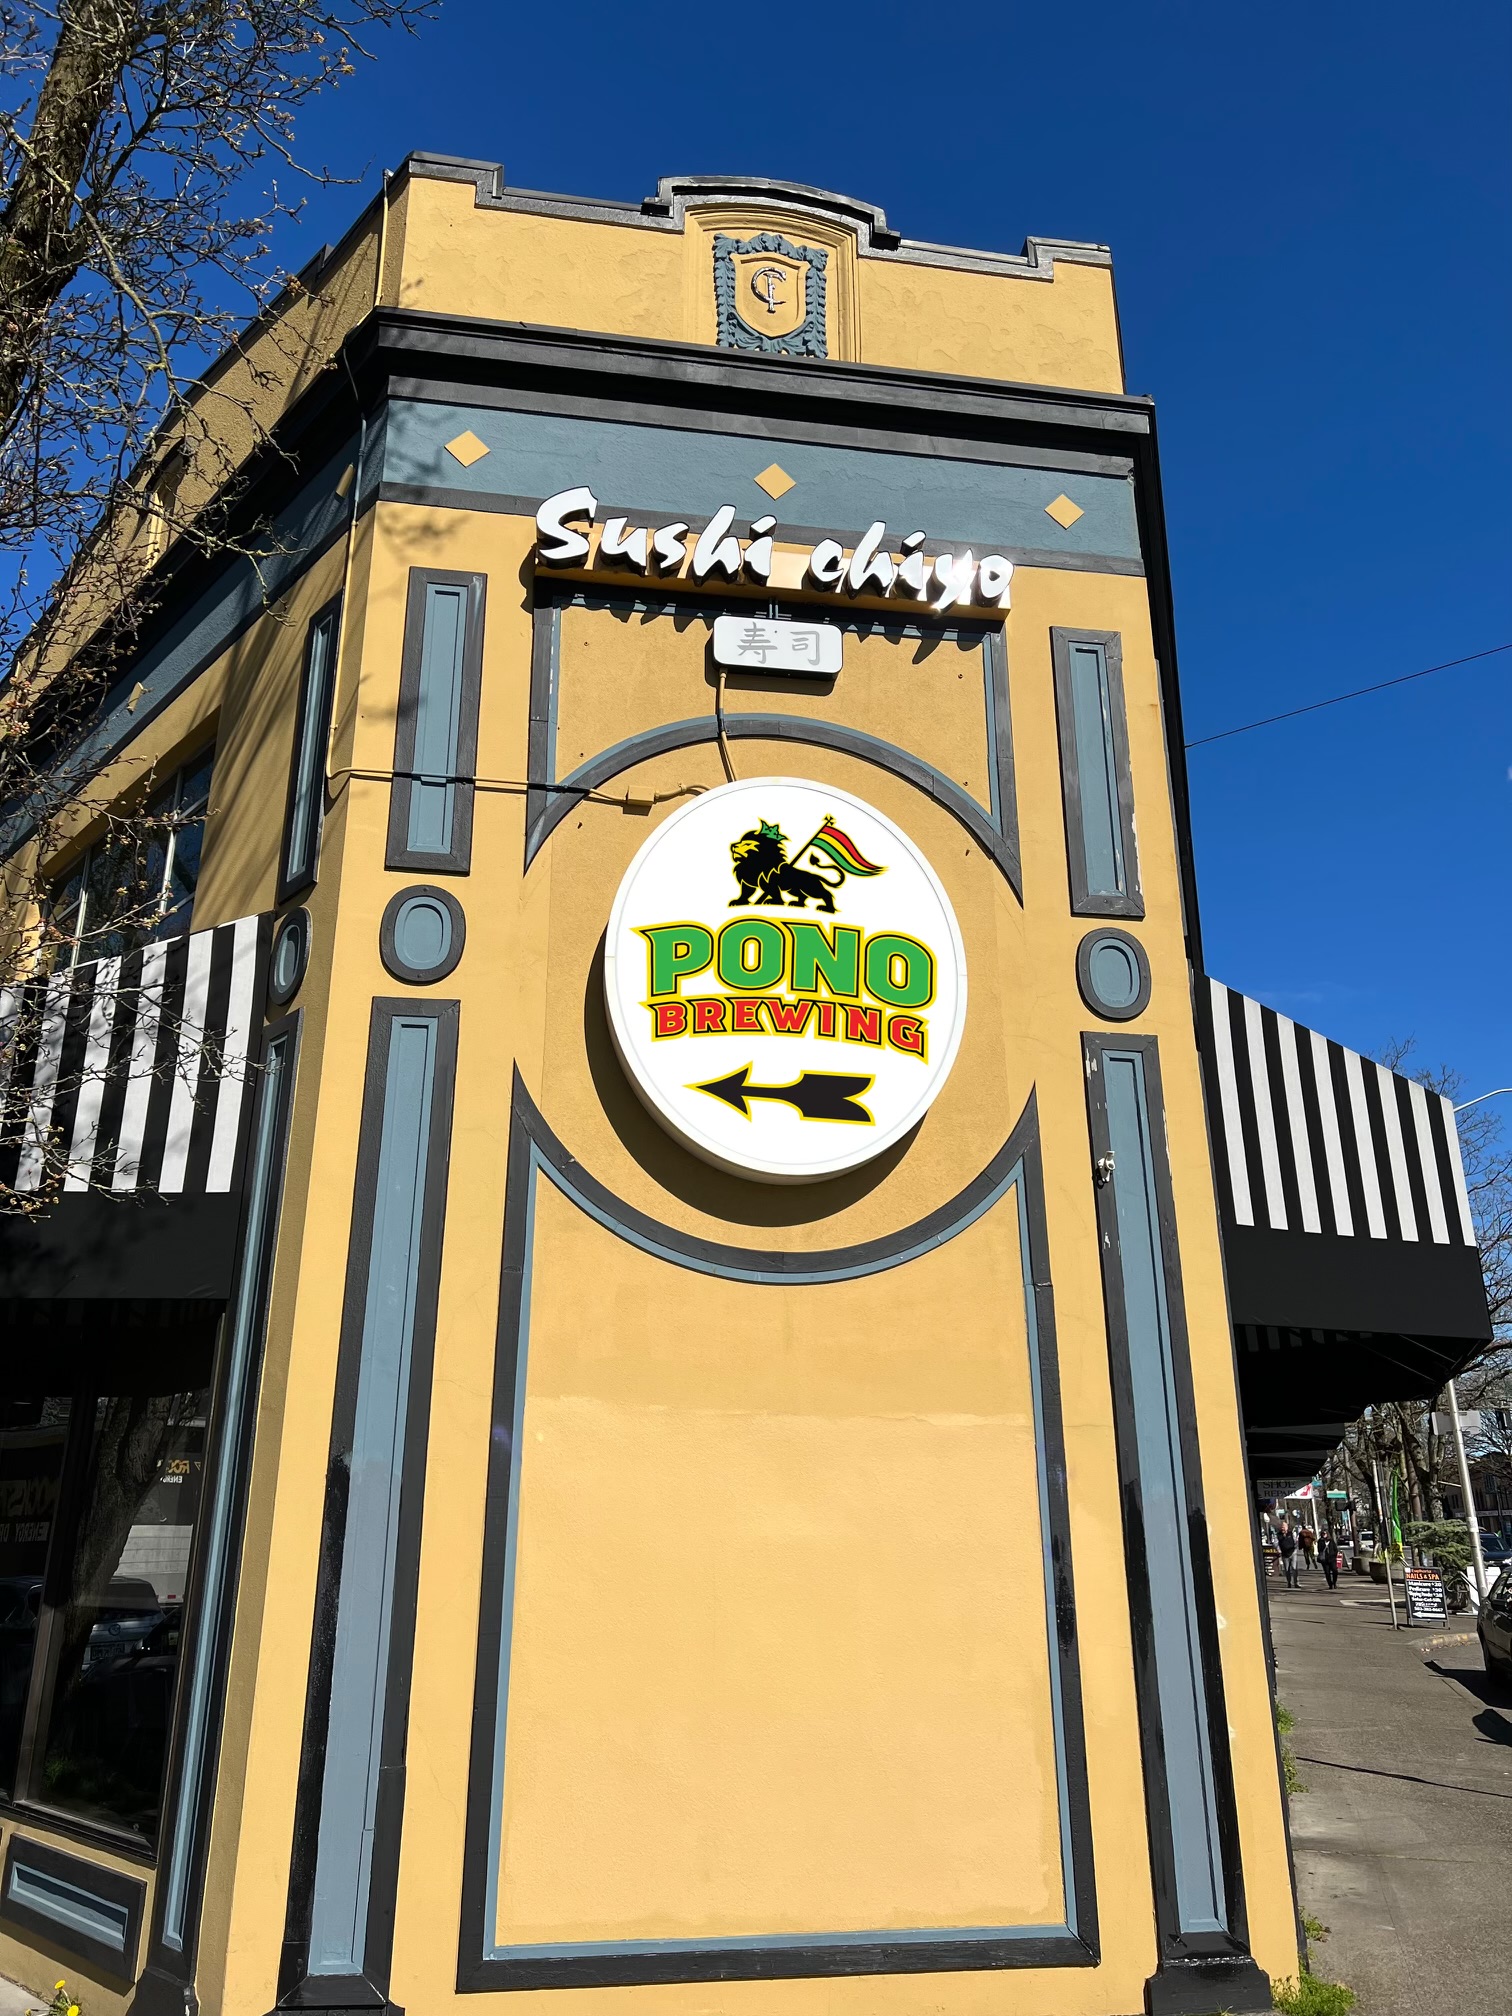 The new Pono Brewing sign that is on NE Sandy Blvd in Portland, Oregon. (image courtesy of Pono Brewing)